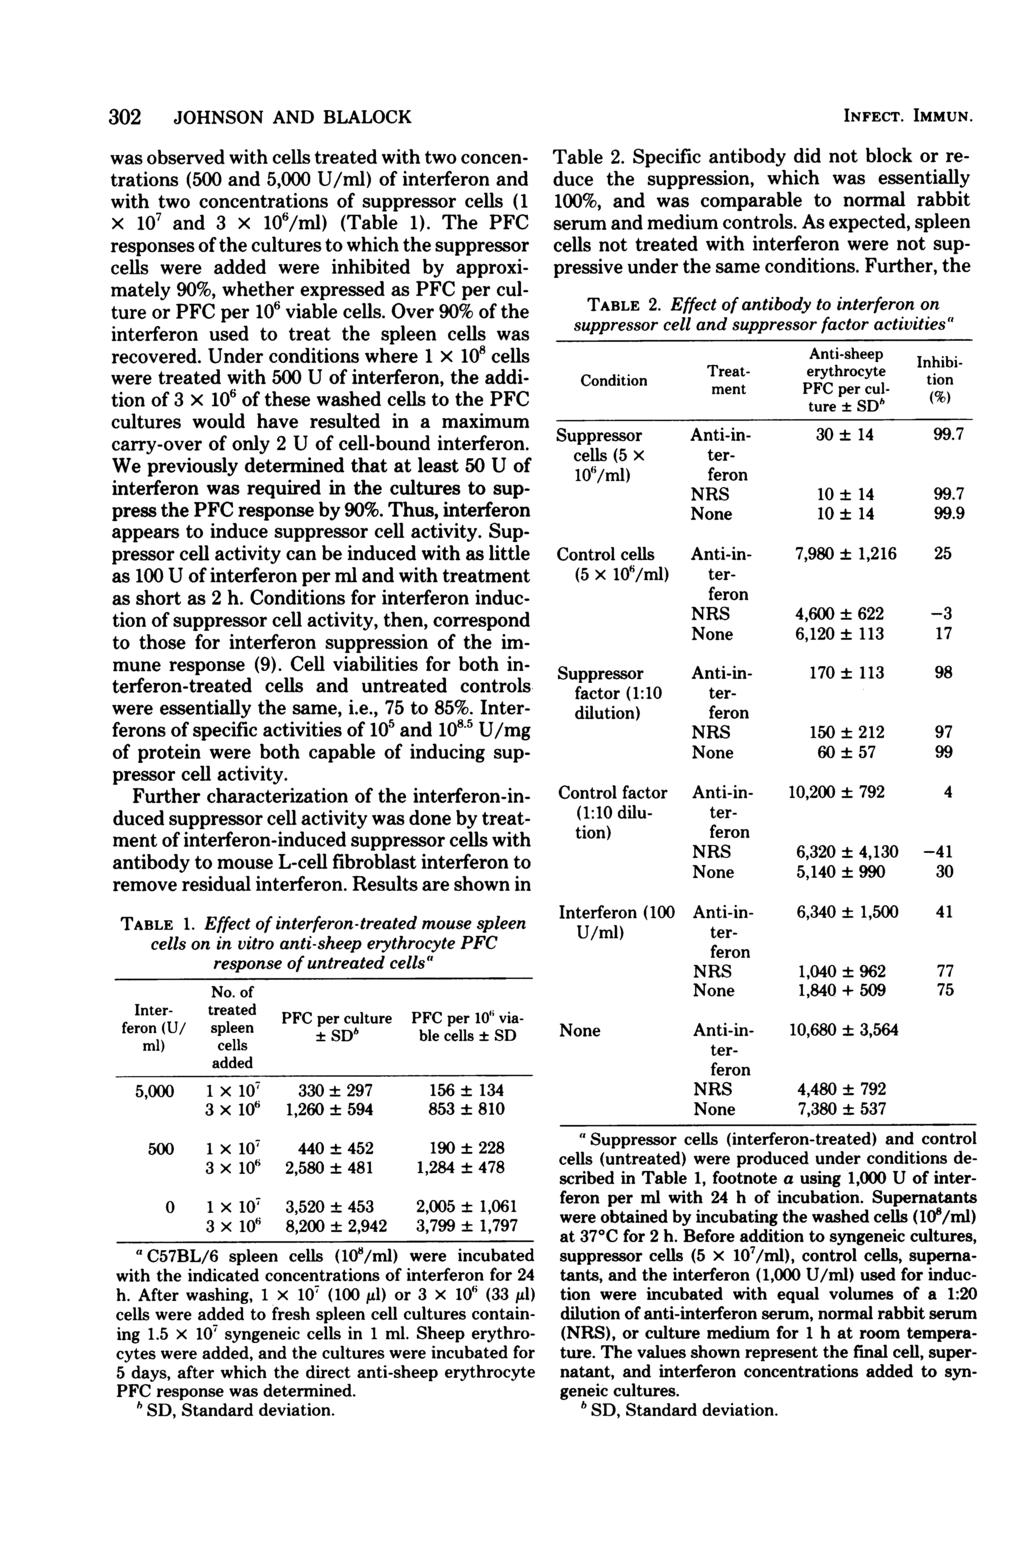 302 JOHNSON AND BLALOCK was observed with cells treated with two concentrations (500 and 5,000 U/ml) of interferon and with two concentrations of suppressor cells (1 x 107 and 3 x 106/ml) (Table 1).